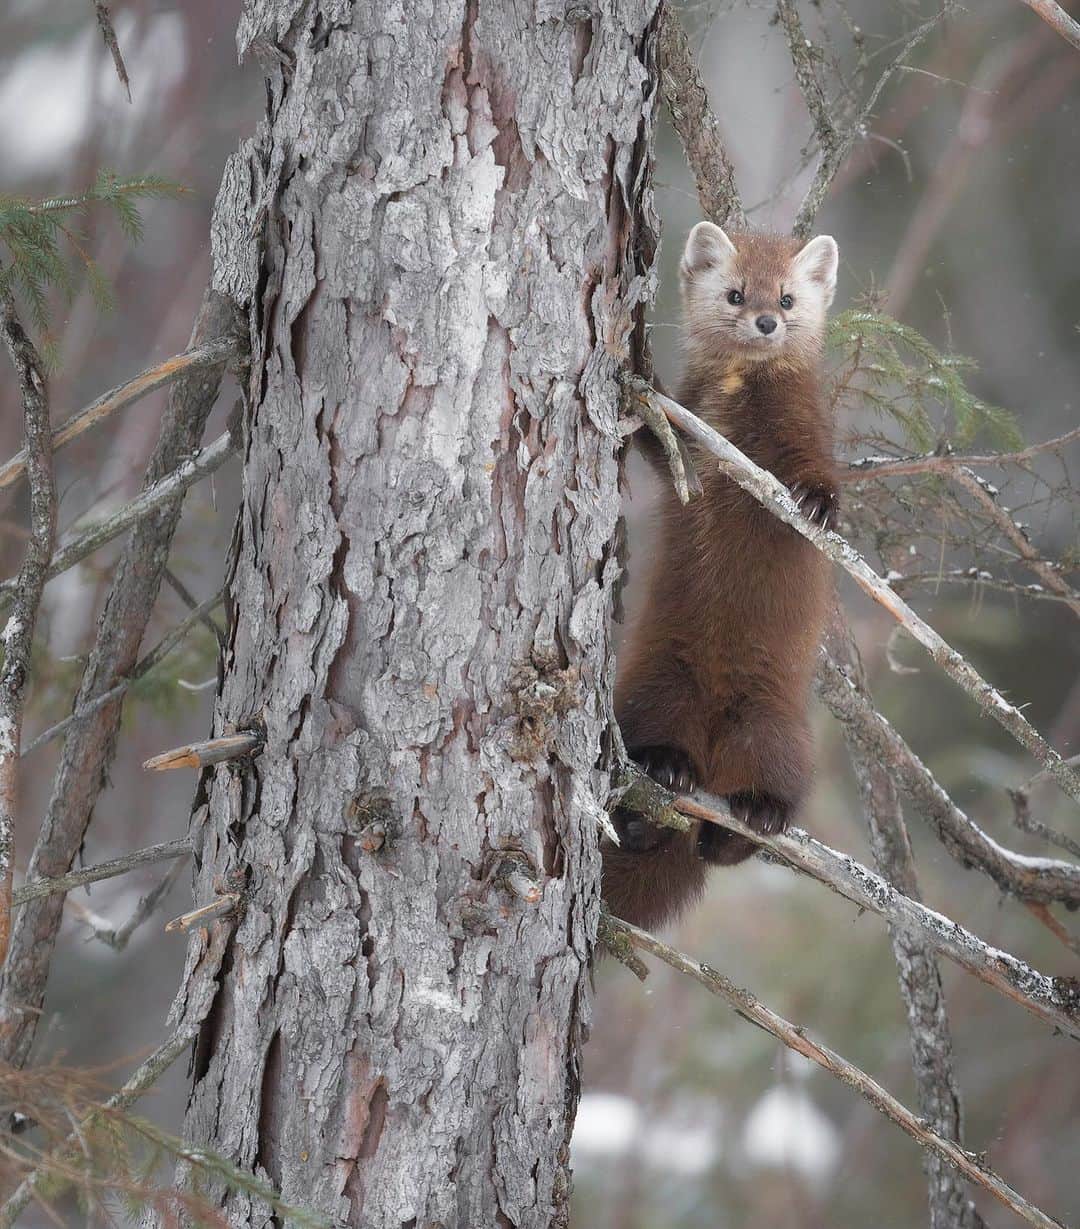 Chase Dekker Wild-Life Imagesのインスタグラム：「This little pine marten tested my patience quite a bit during my recent shoot in Canada. During my time in the Canadian Rockies I walked right into a marten on a trail, but since I didn’t have the right lenses, I didn’t take any photos and just watched figuring there would be many more in eastern Canada. However, as I made my way east, these little mustelids proved quite difficult to pin down and seemed mostly nocturnal, only leaving new trails at night. I eventually tracked down this marten’s den and waited and waited for it to come out. One morning, I waited nearby for nearly 3 hours before checking another location for only half an hour. When I returned, a new set of tracks were made which meant I missed the window and the marten had gone off hunting. I repeatedly checked the location over the course of the day to see if it had returned, but had no such luck. It wasn’t until early the next morning that I found the marten scurrying across the snow and scaling various trees, possibly looking for blue jays (jay feathers were around its den). A face like this though always make all the hours spent waiting worth it!」